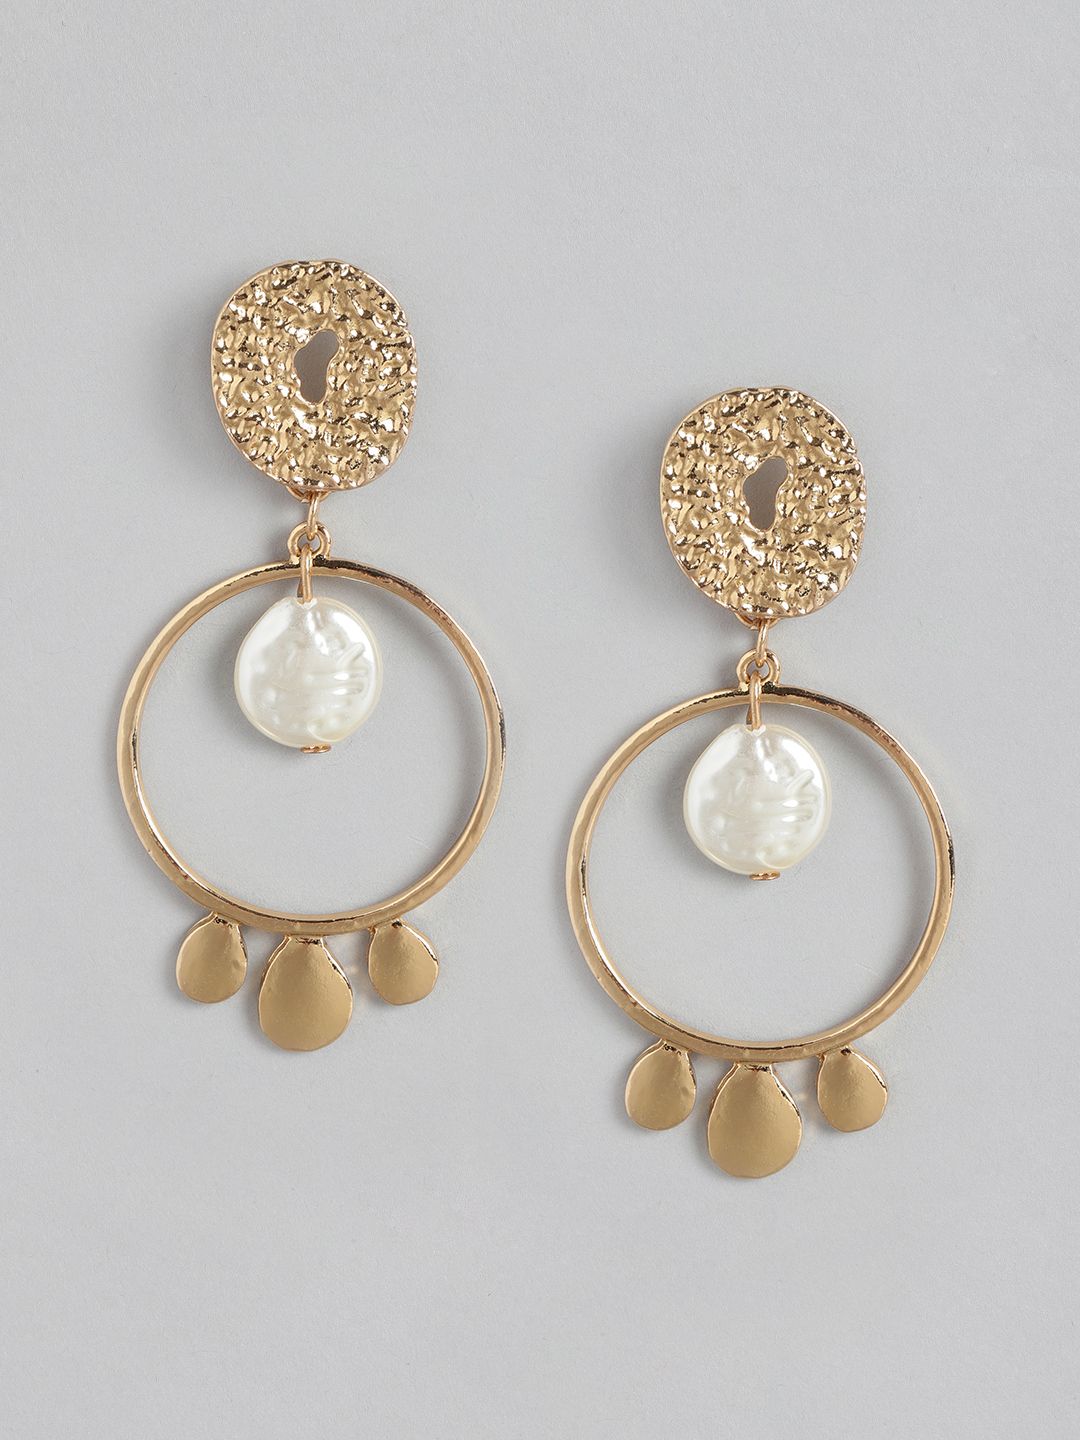 DressBerry Gold-Toned & Off-White Beaded Circular Drop Earrings Price in India